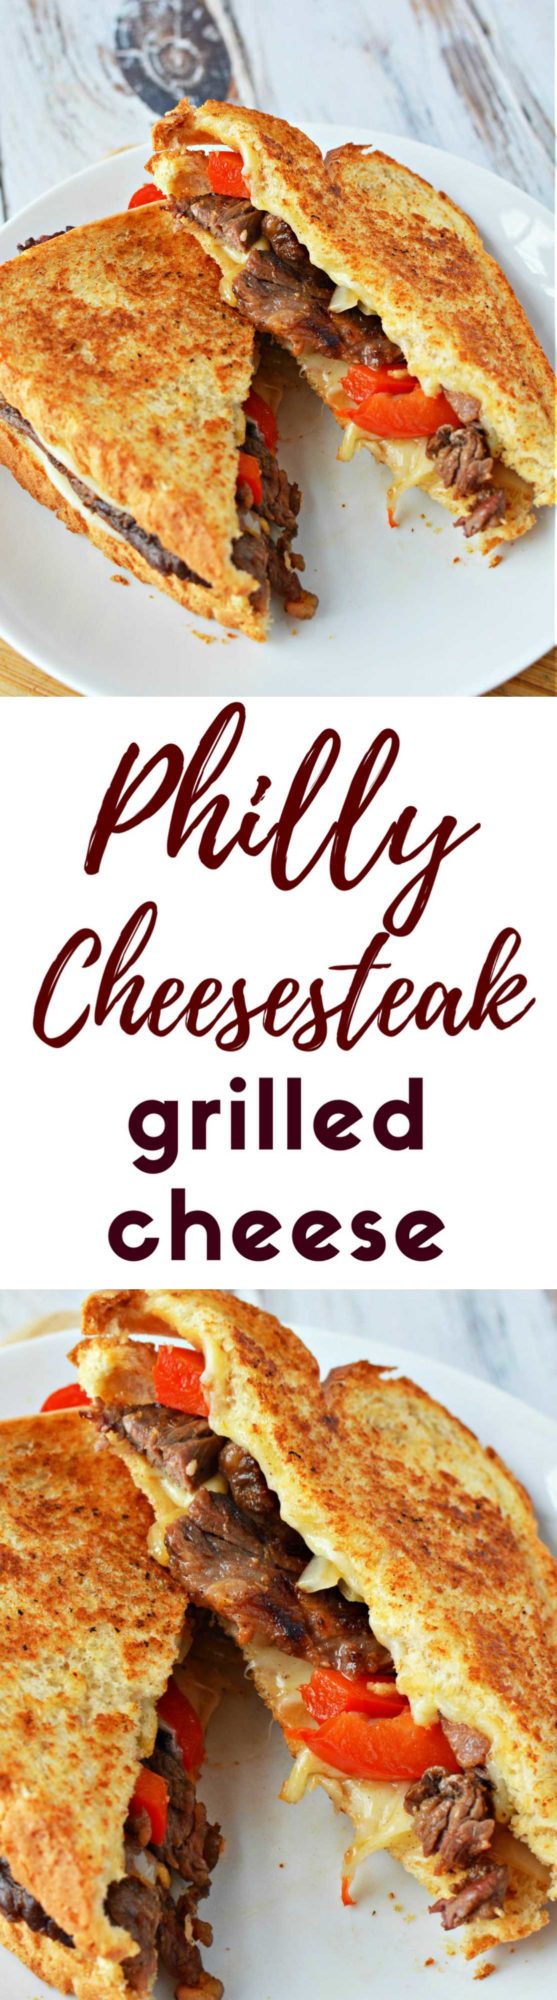 Philly cheesesteak grilled cheese